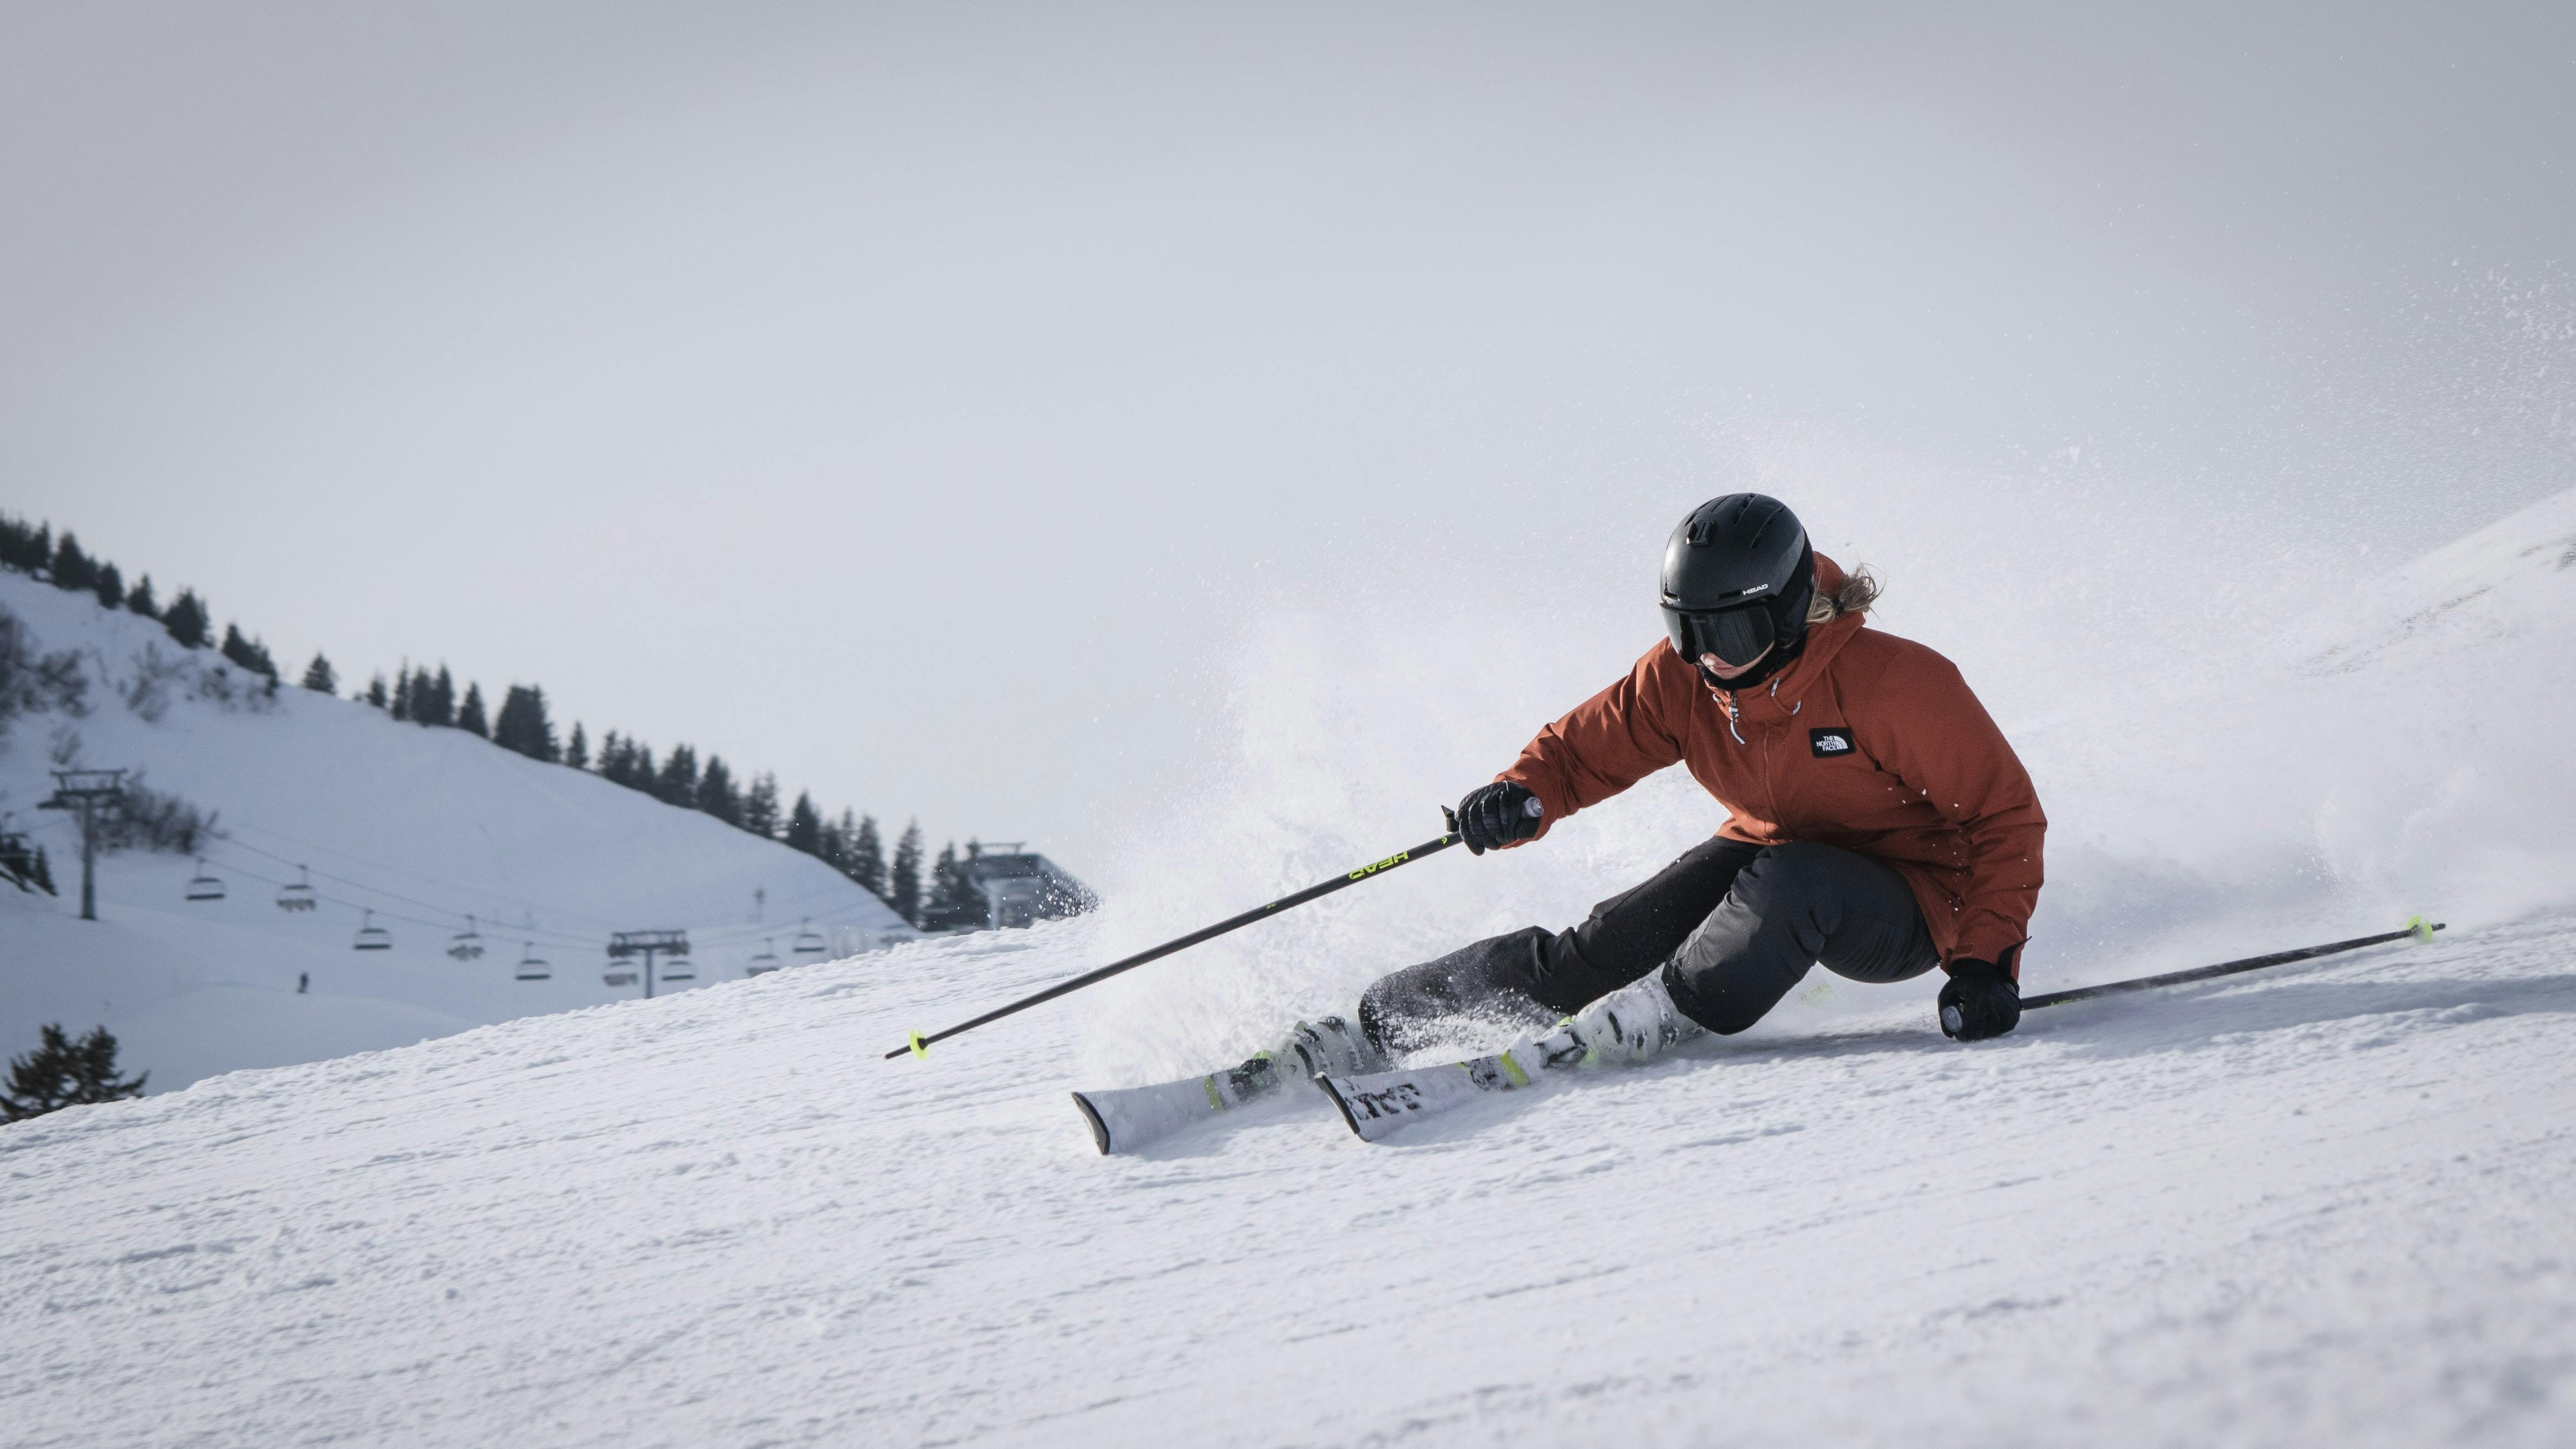 A skier in a red jacket bombing down a slope